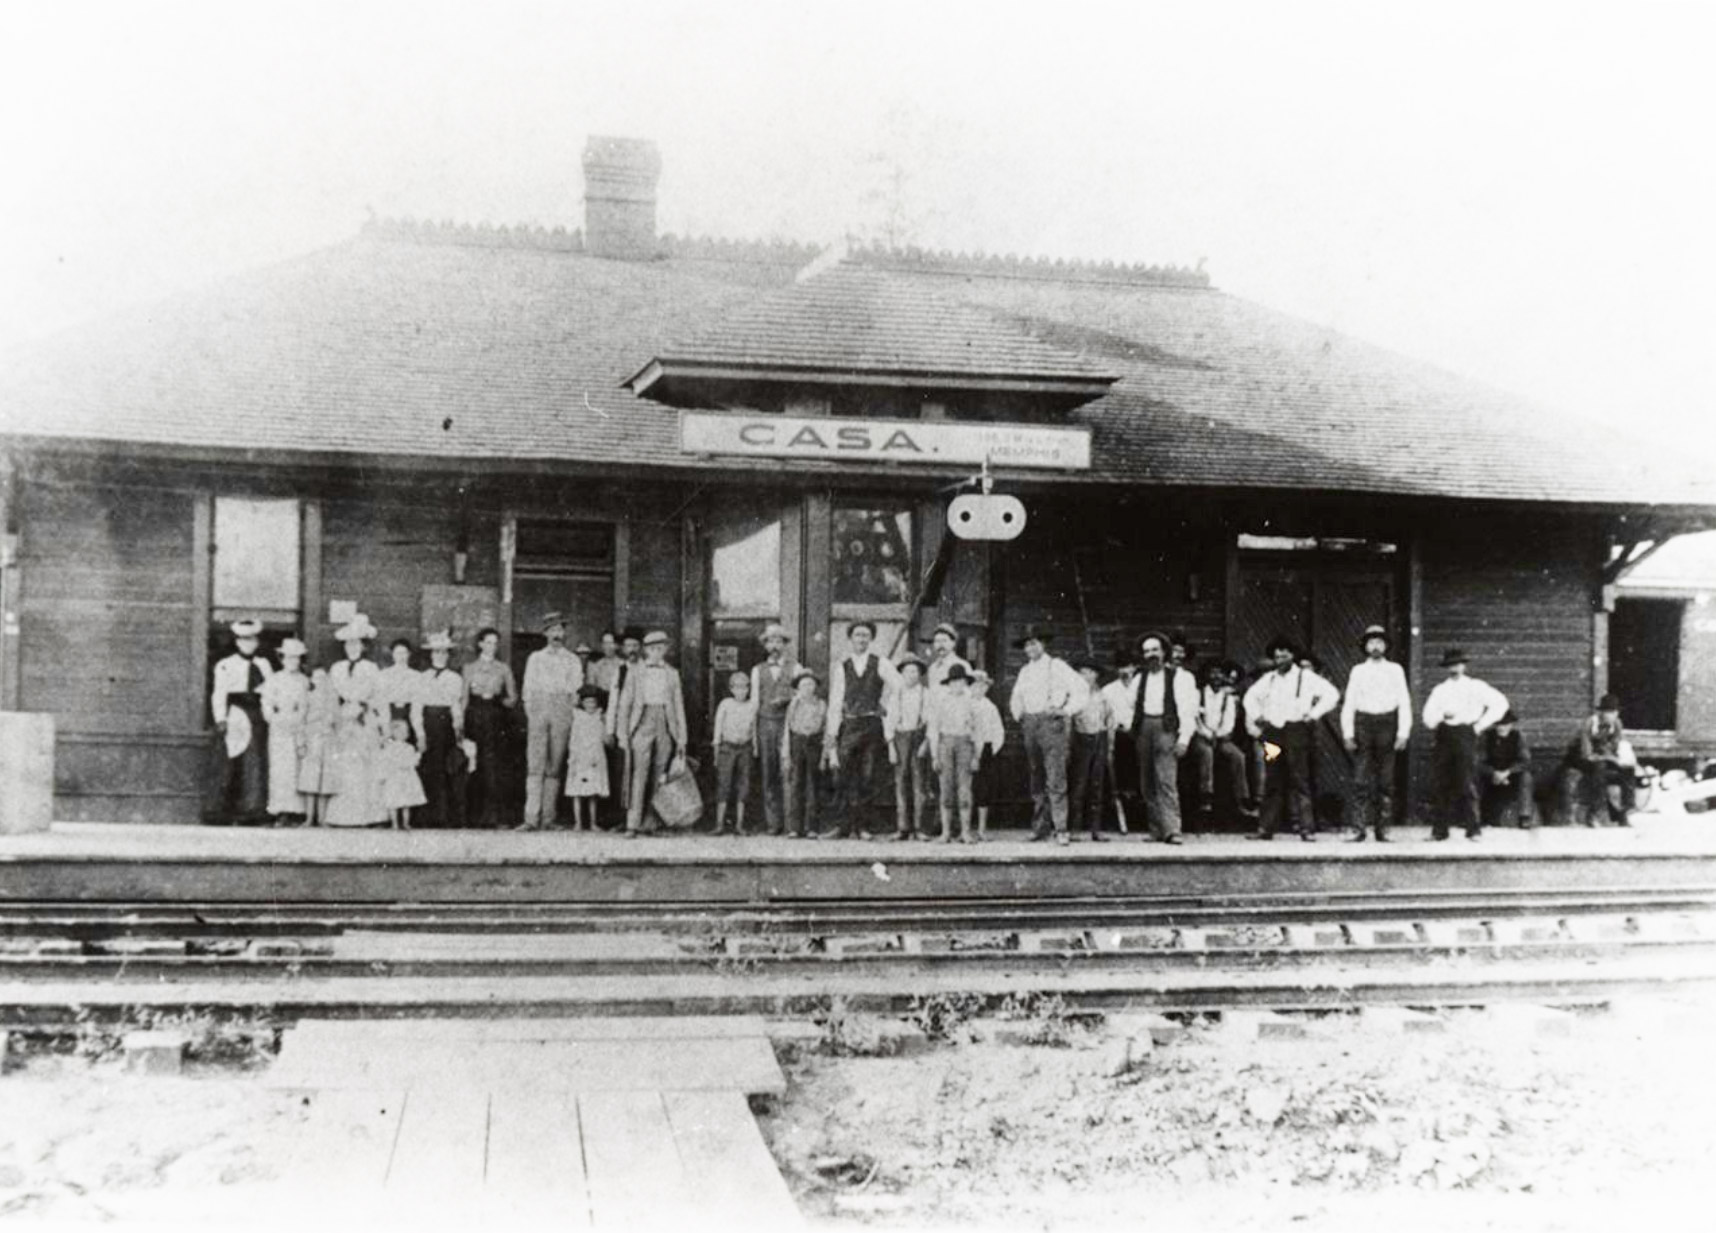 Group of people standing on porch of single story building labeled "Casa"